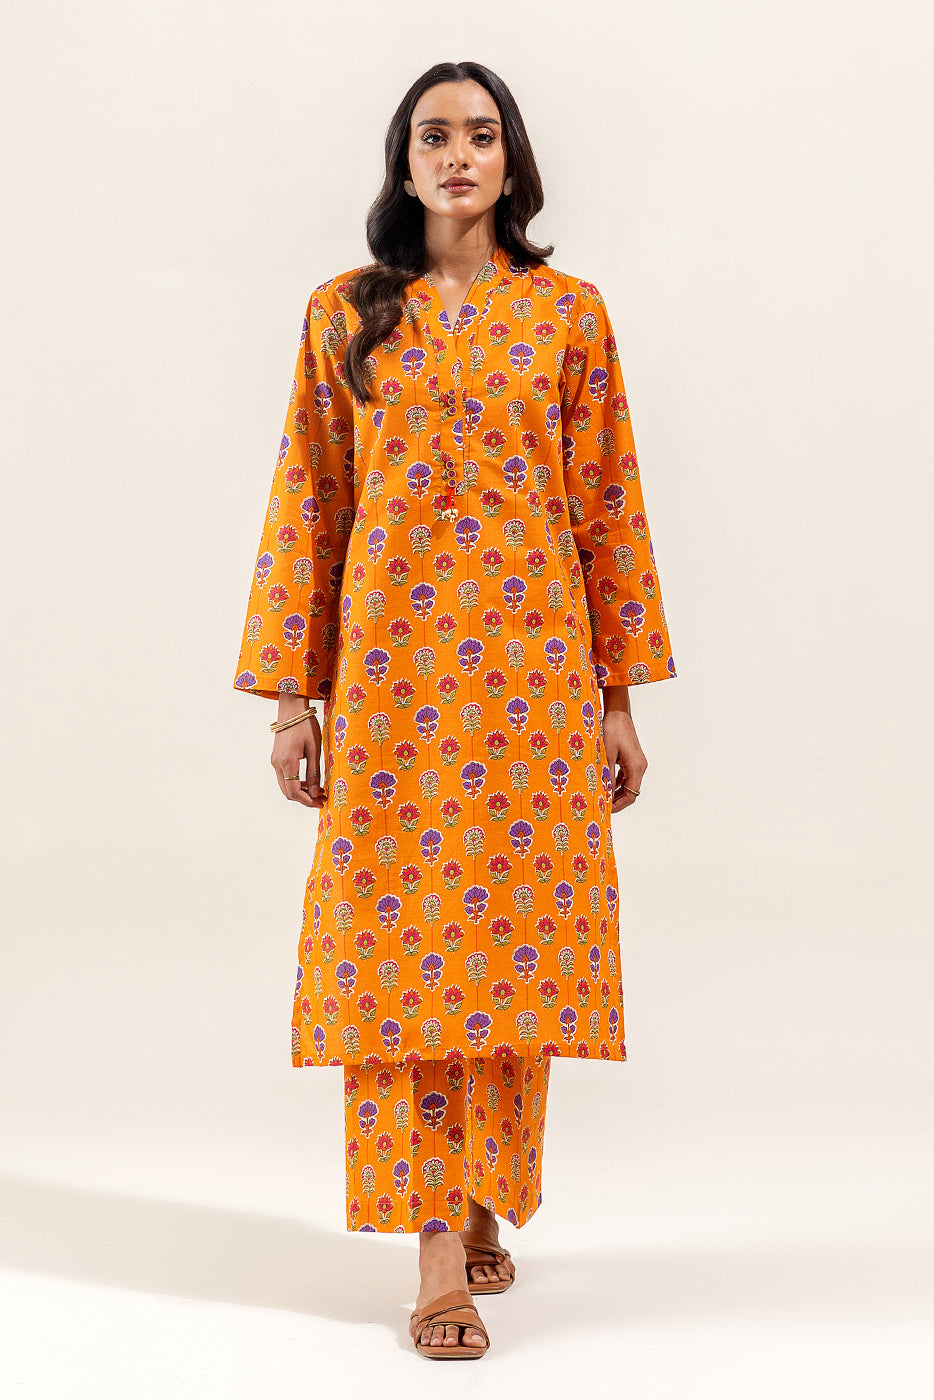 2 PIECE PRINTED SUIT-OCRE BLOOM (UNSTITCHED)